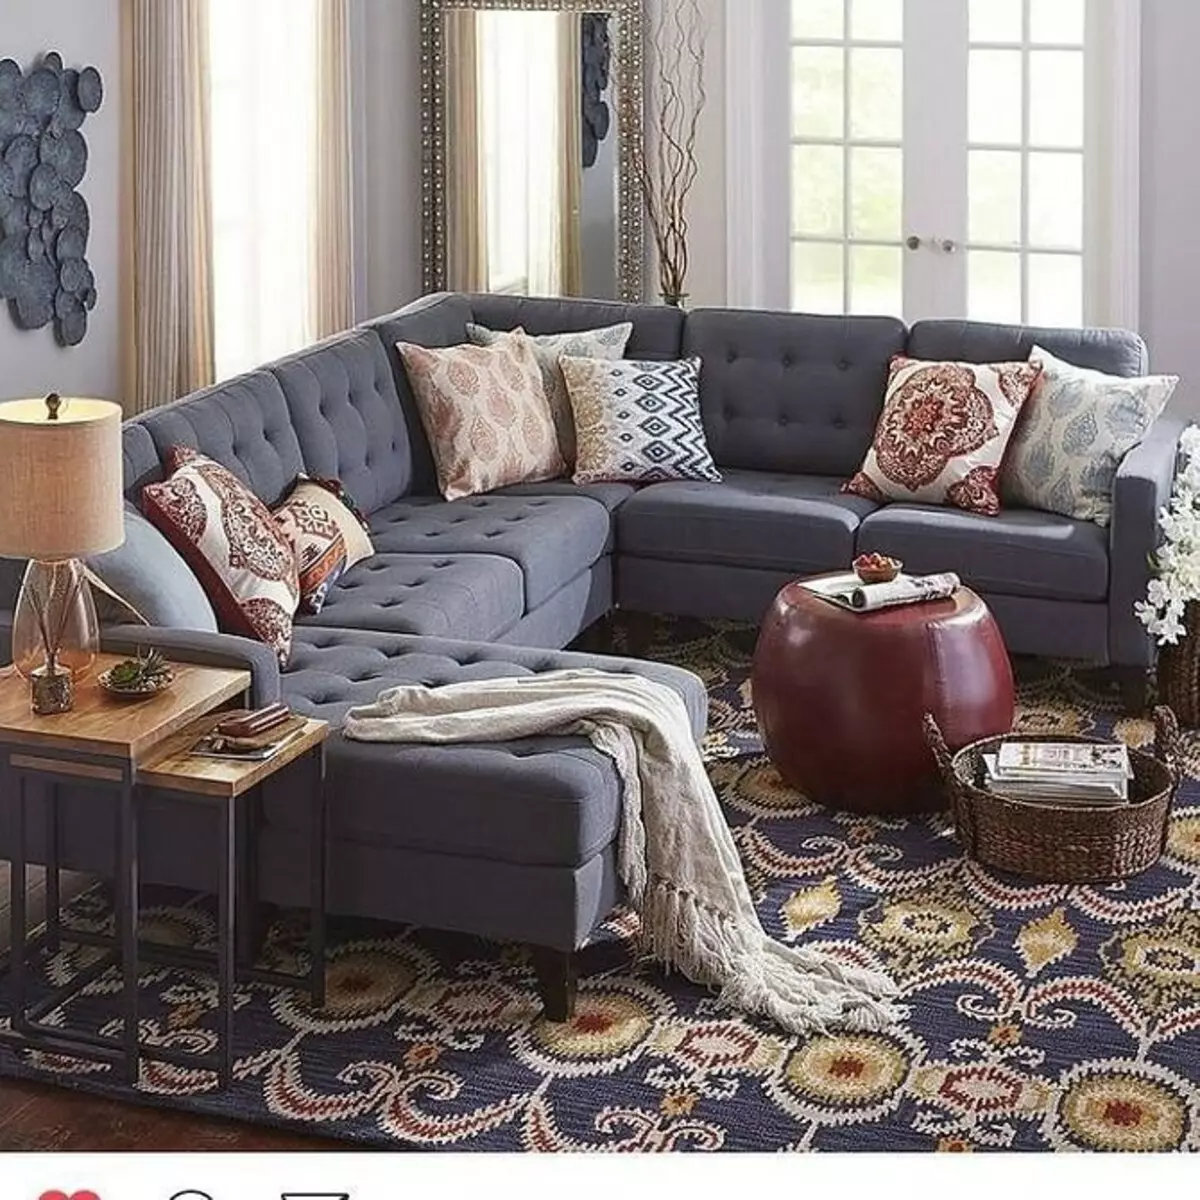 How to combine prints or patterns in the interior: 8 secrets 9920_25